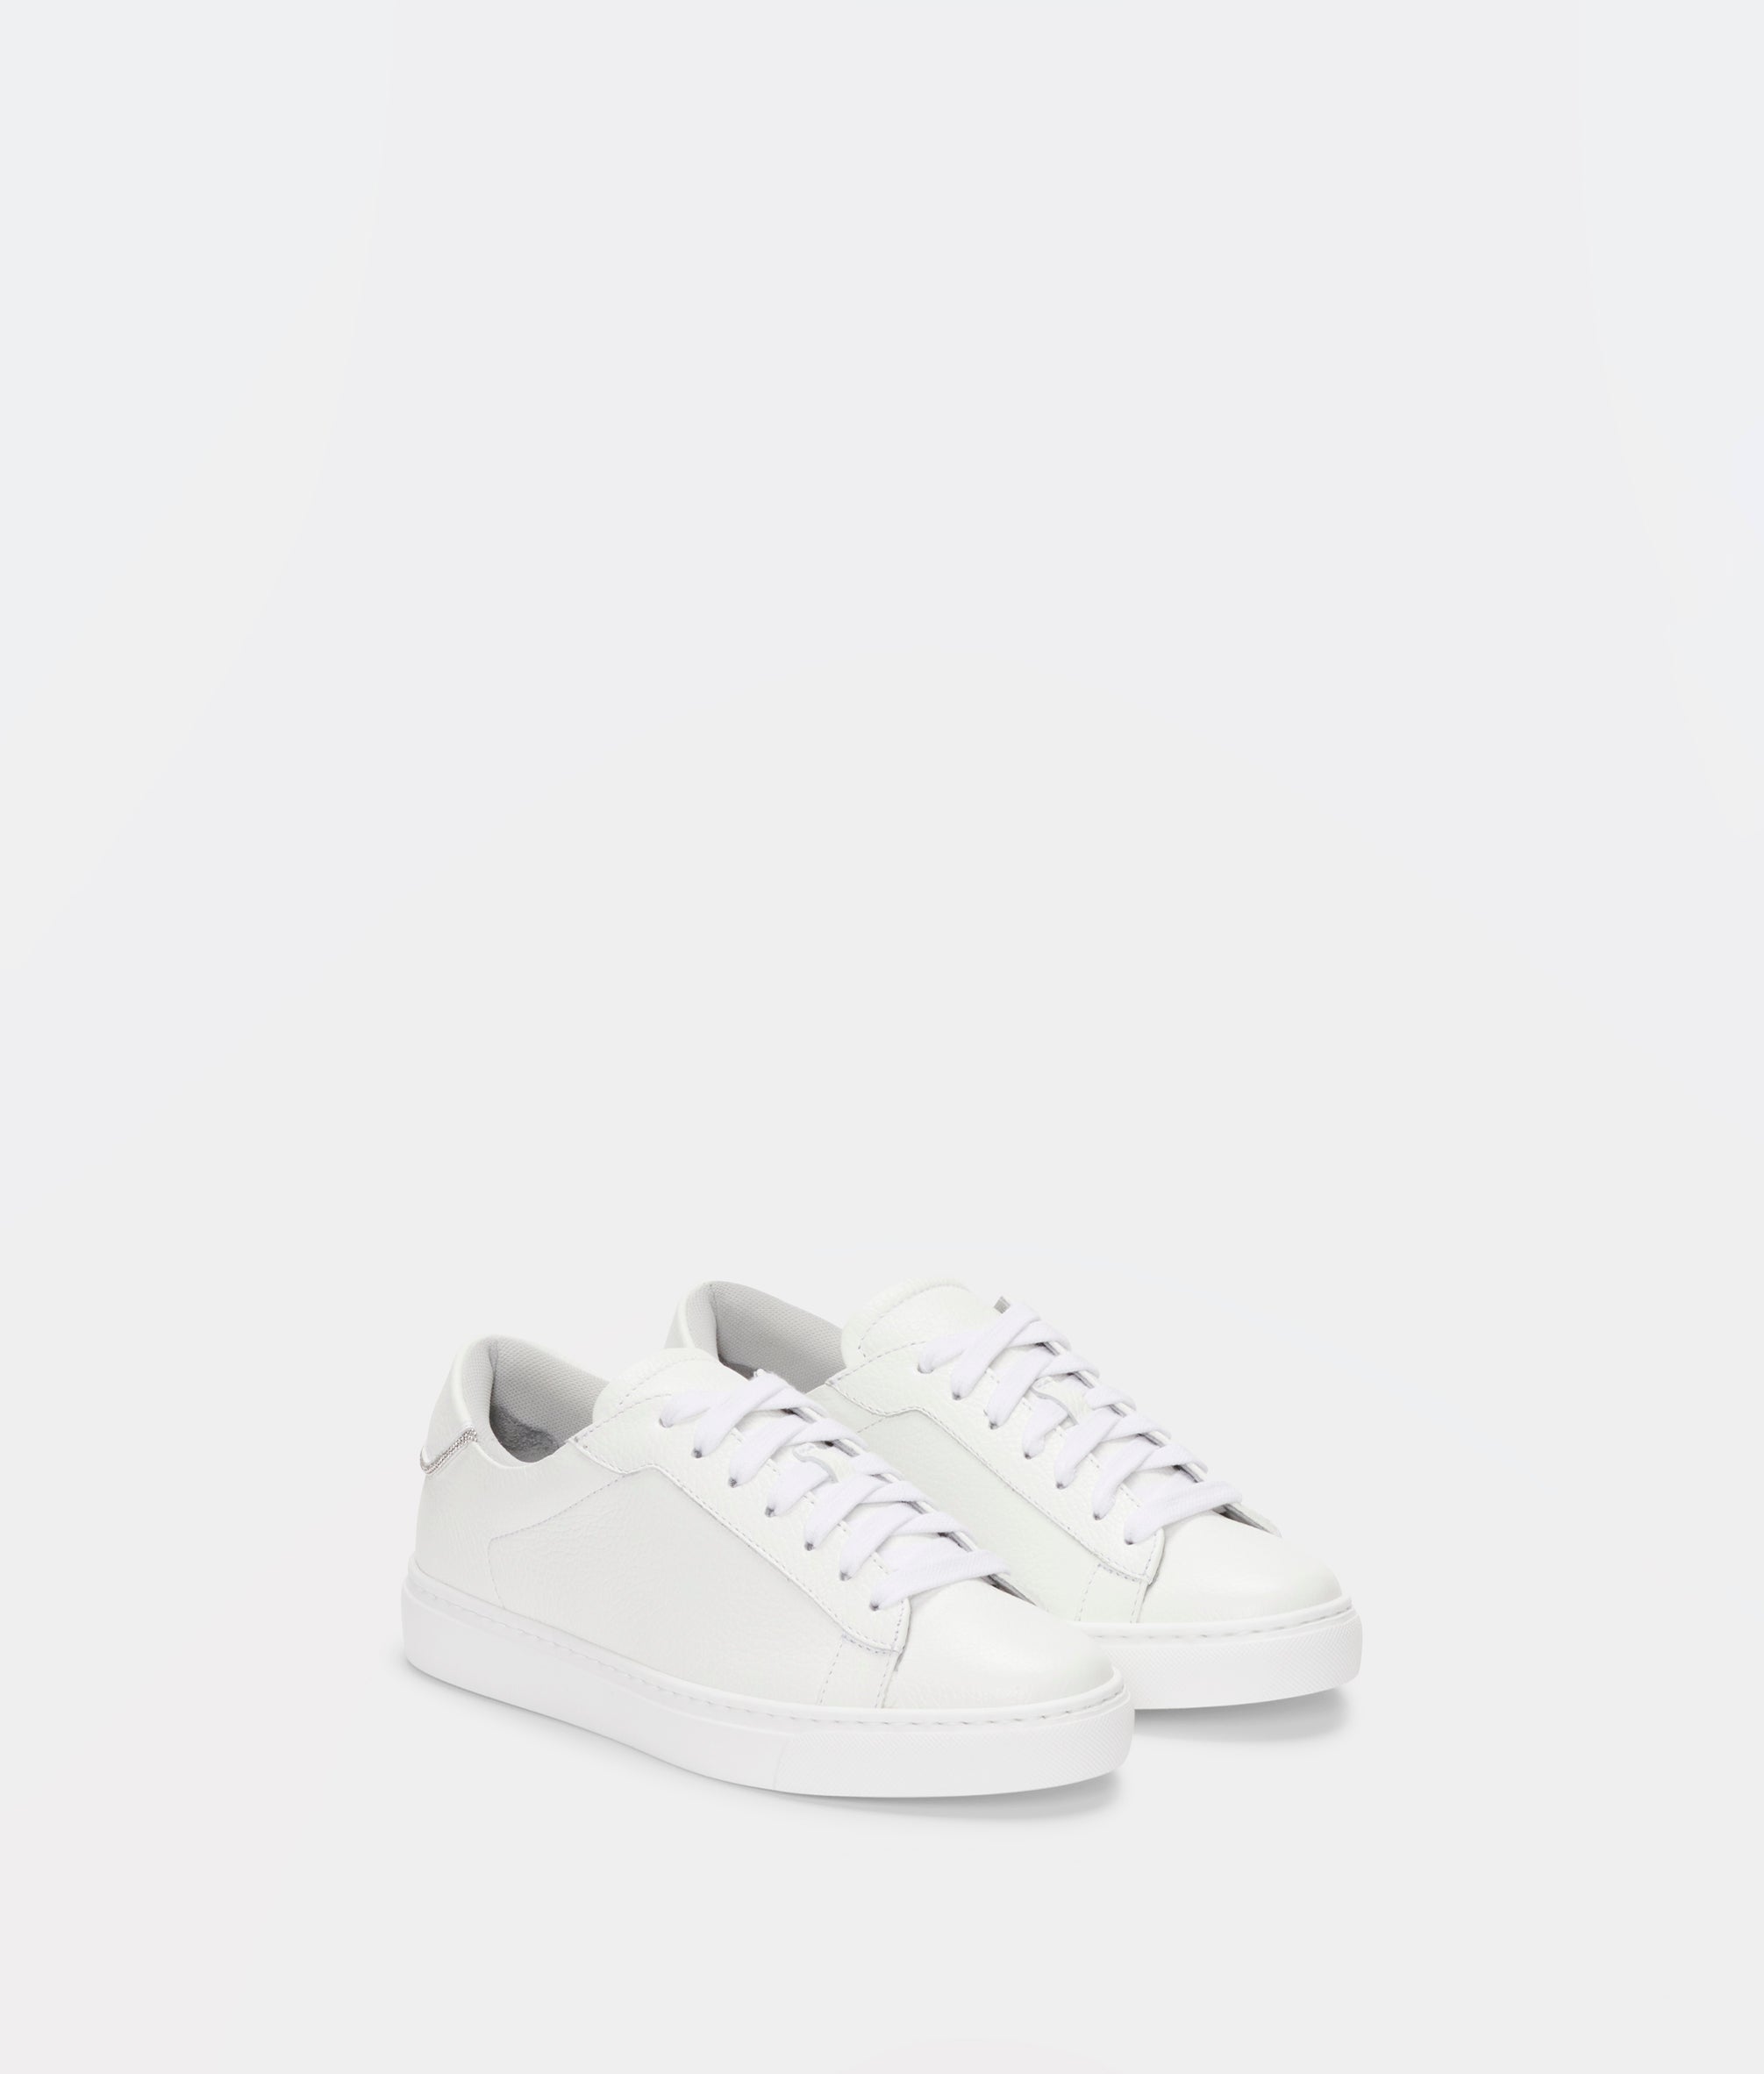 Dalila leather sneakers, white